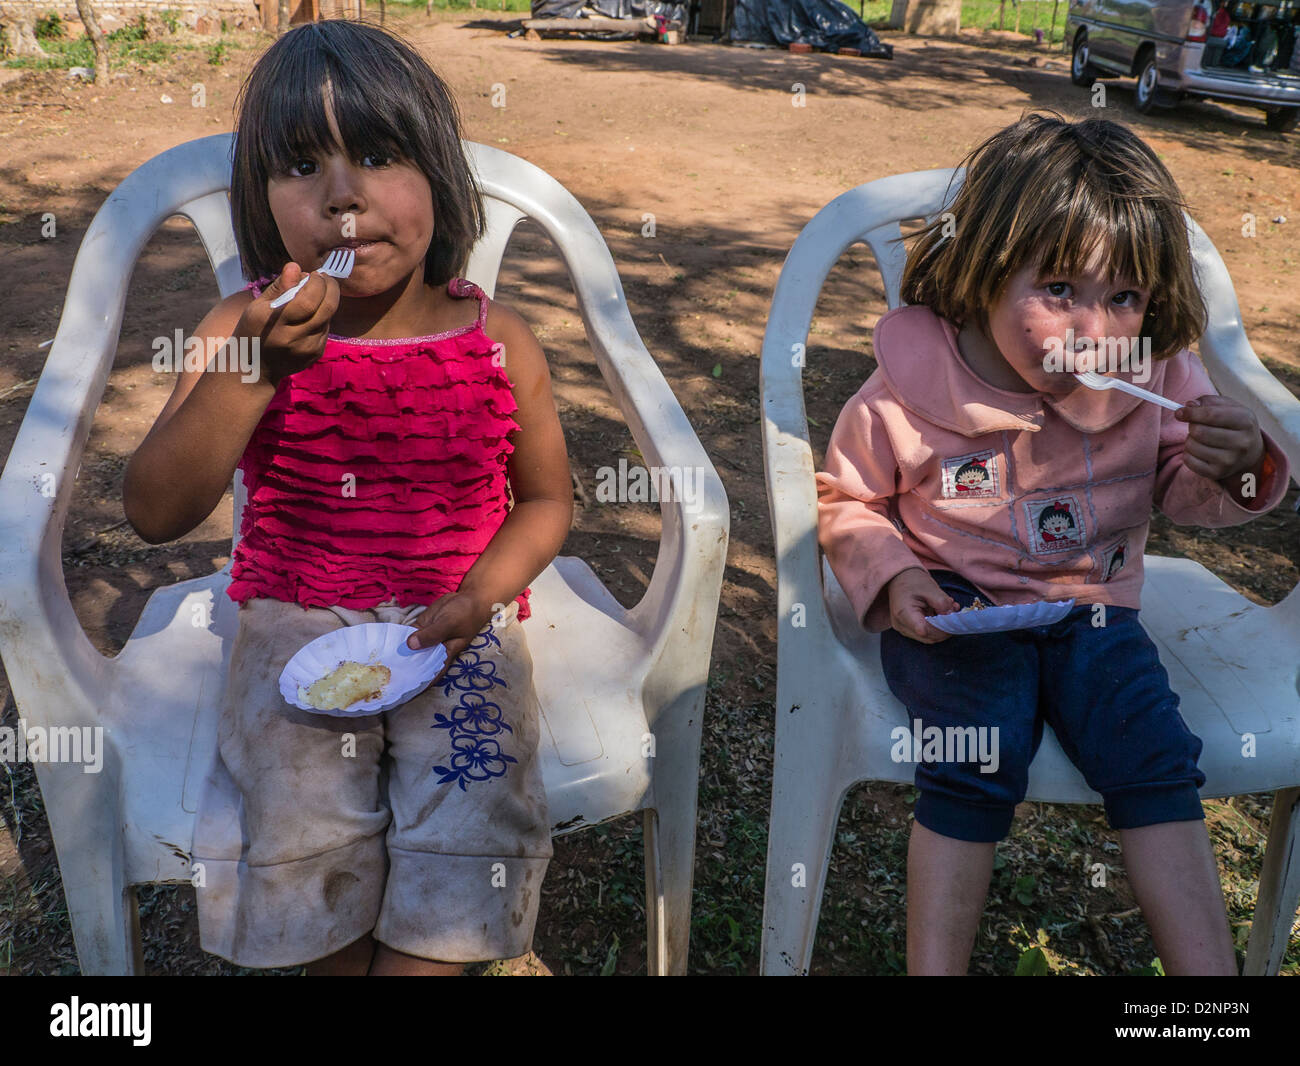 Two young girls sitting on white plastic chairs, outside at a Habitat for Humanity building site, eating cake. Stock Photo